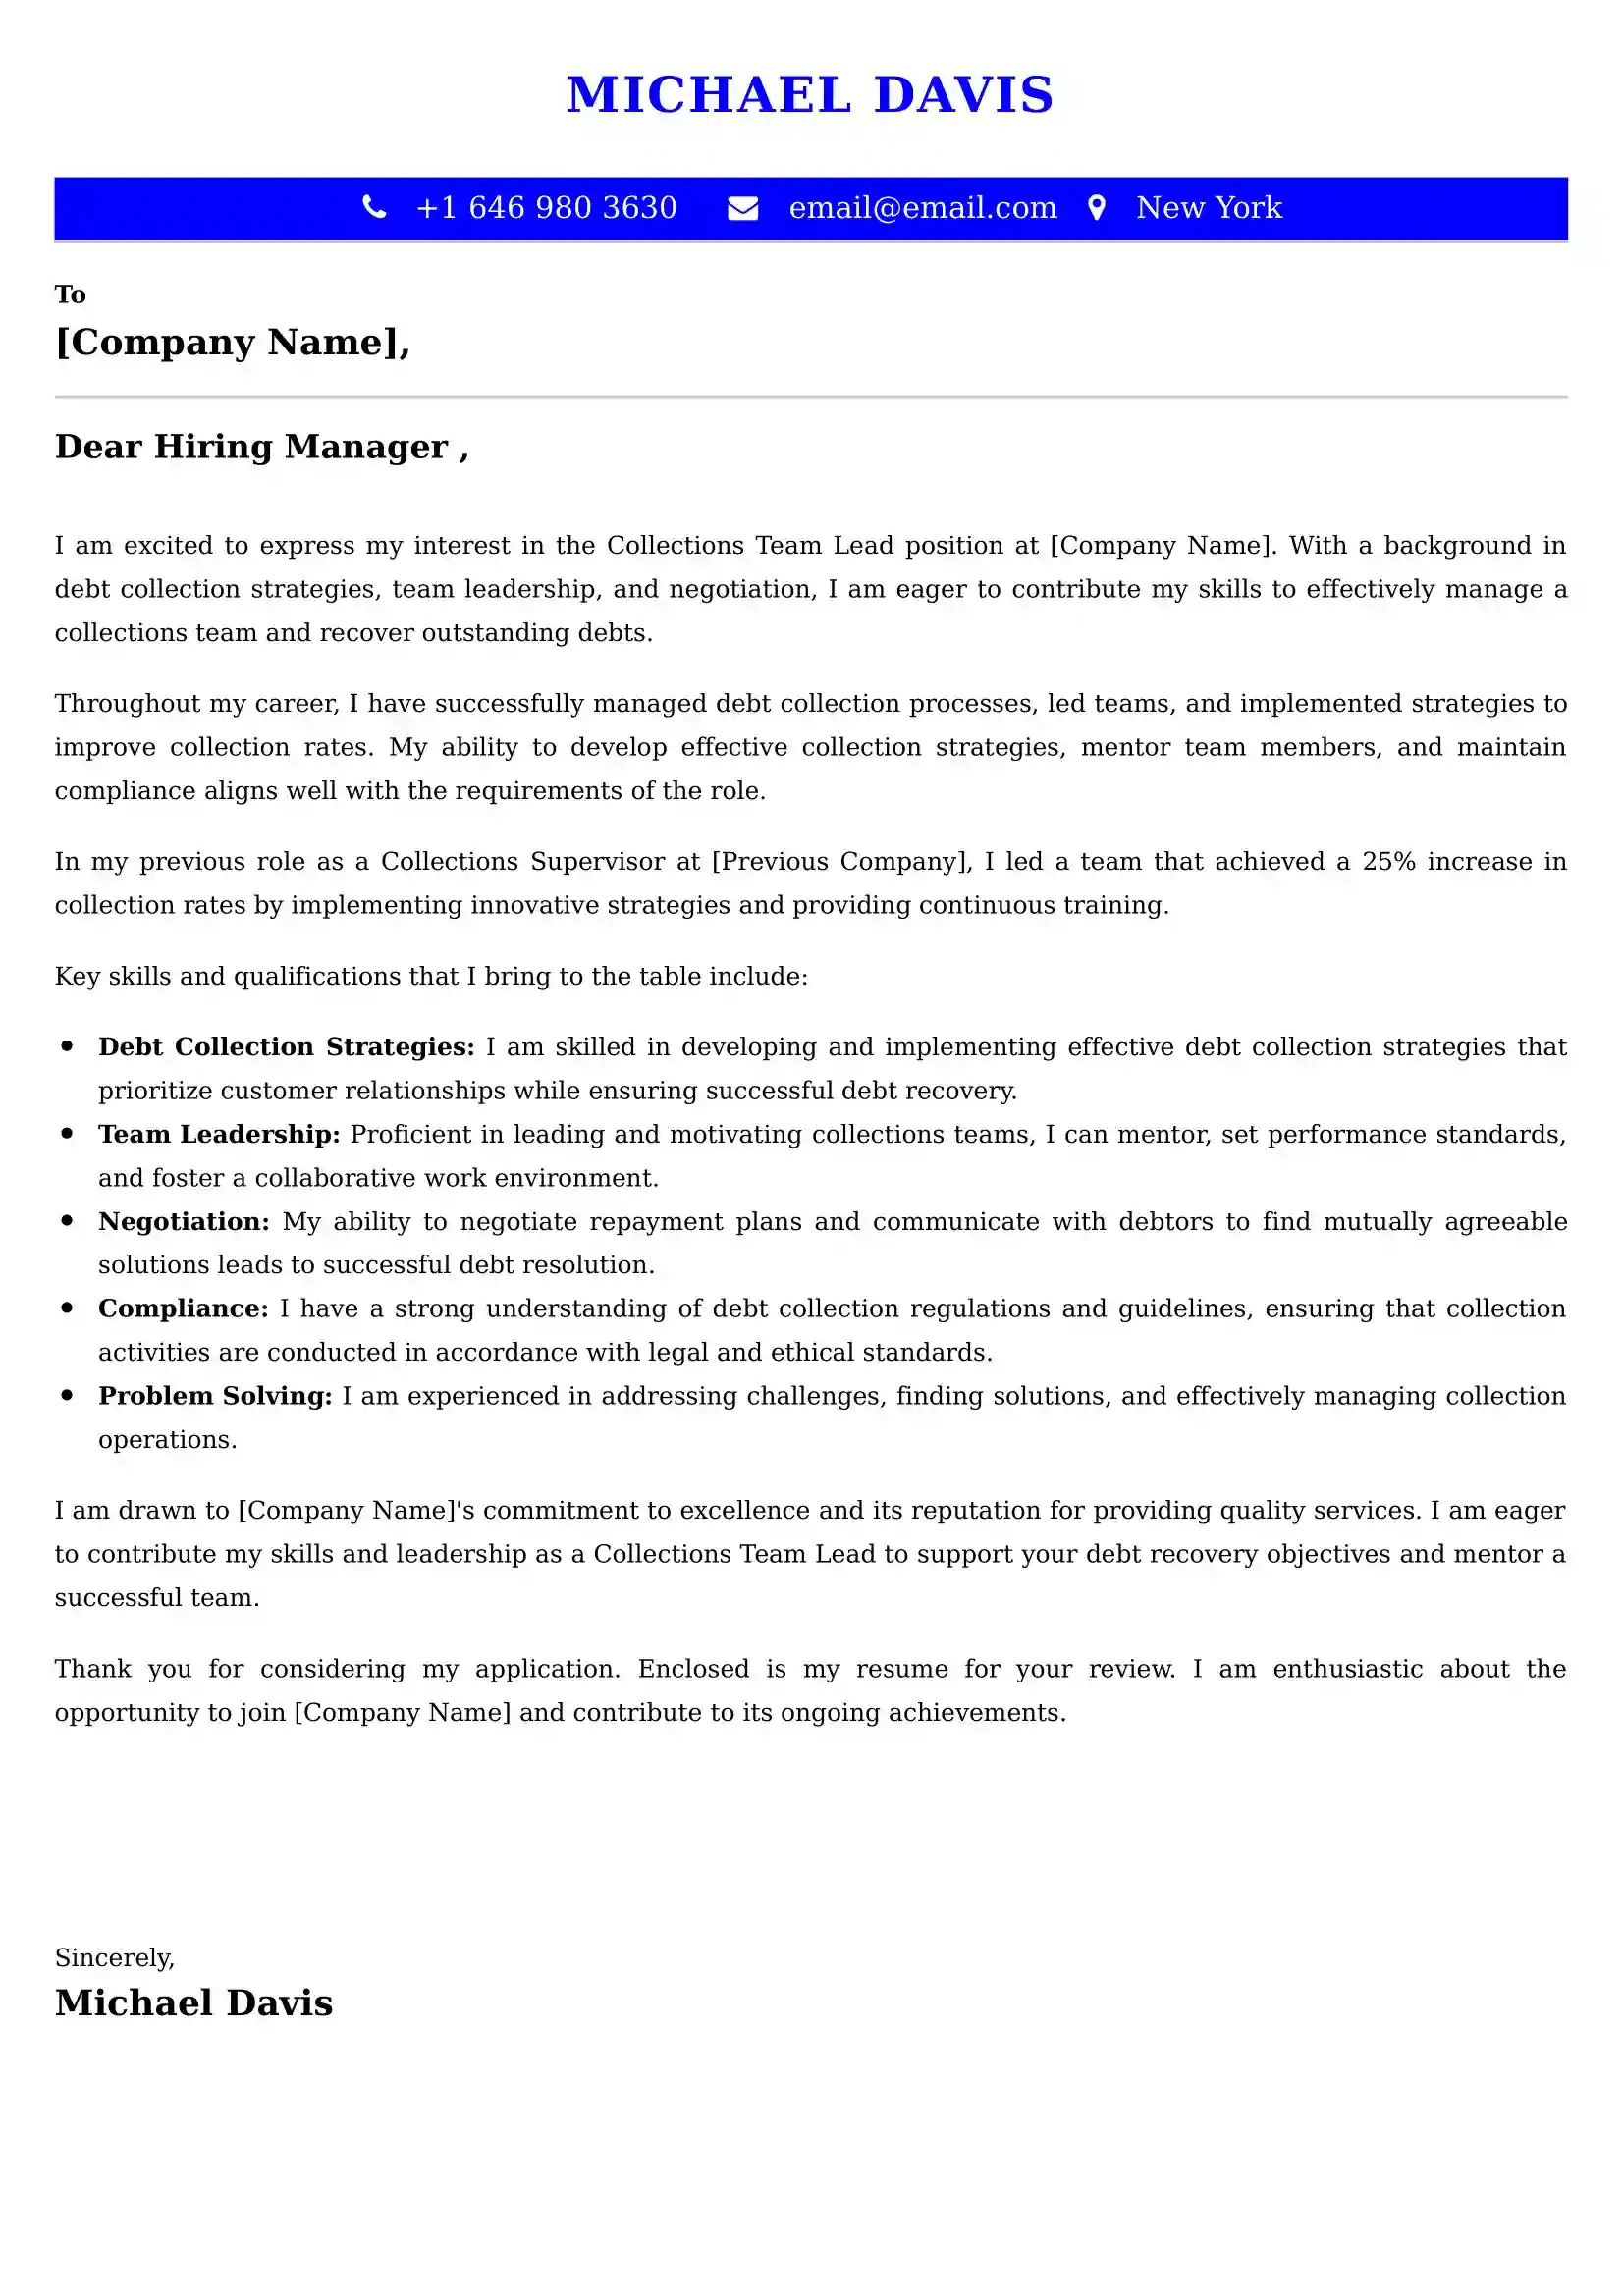 Collections Team Lead Cover Letter Examples - Latest UK Format